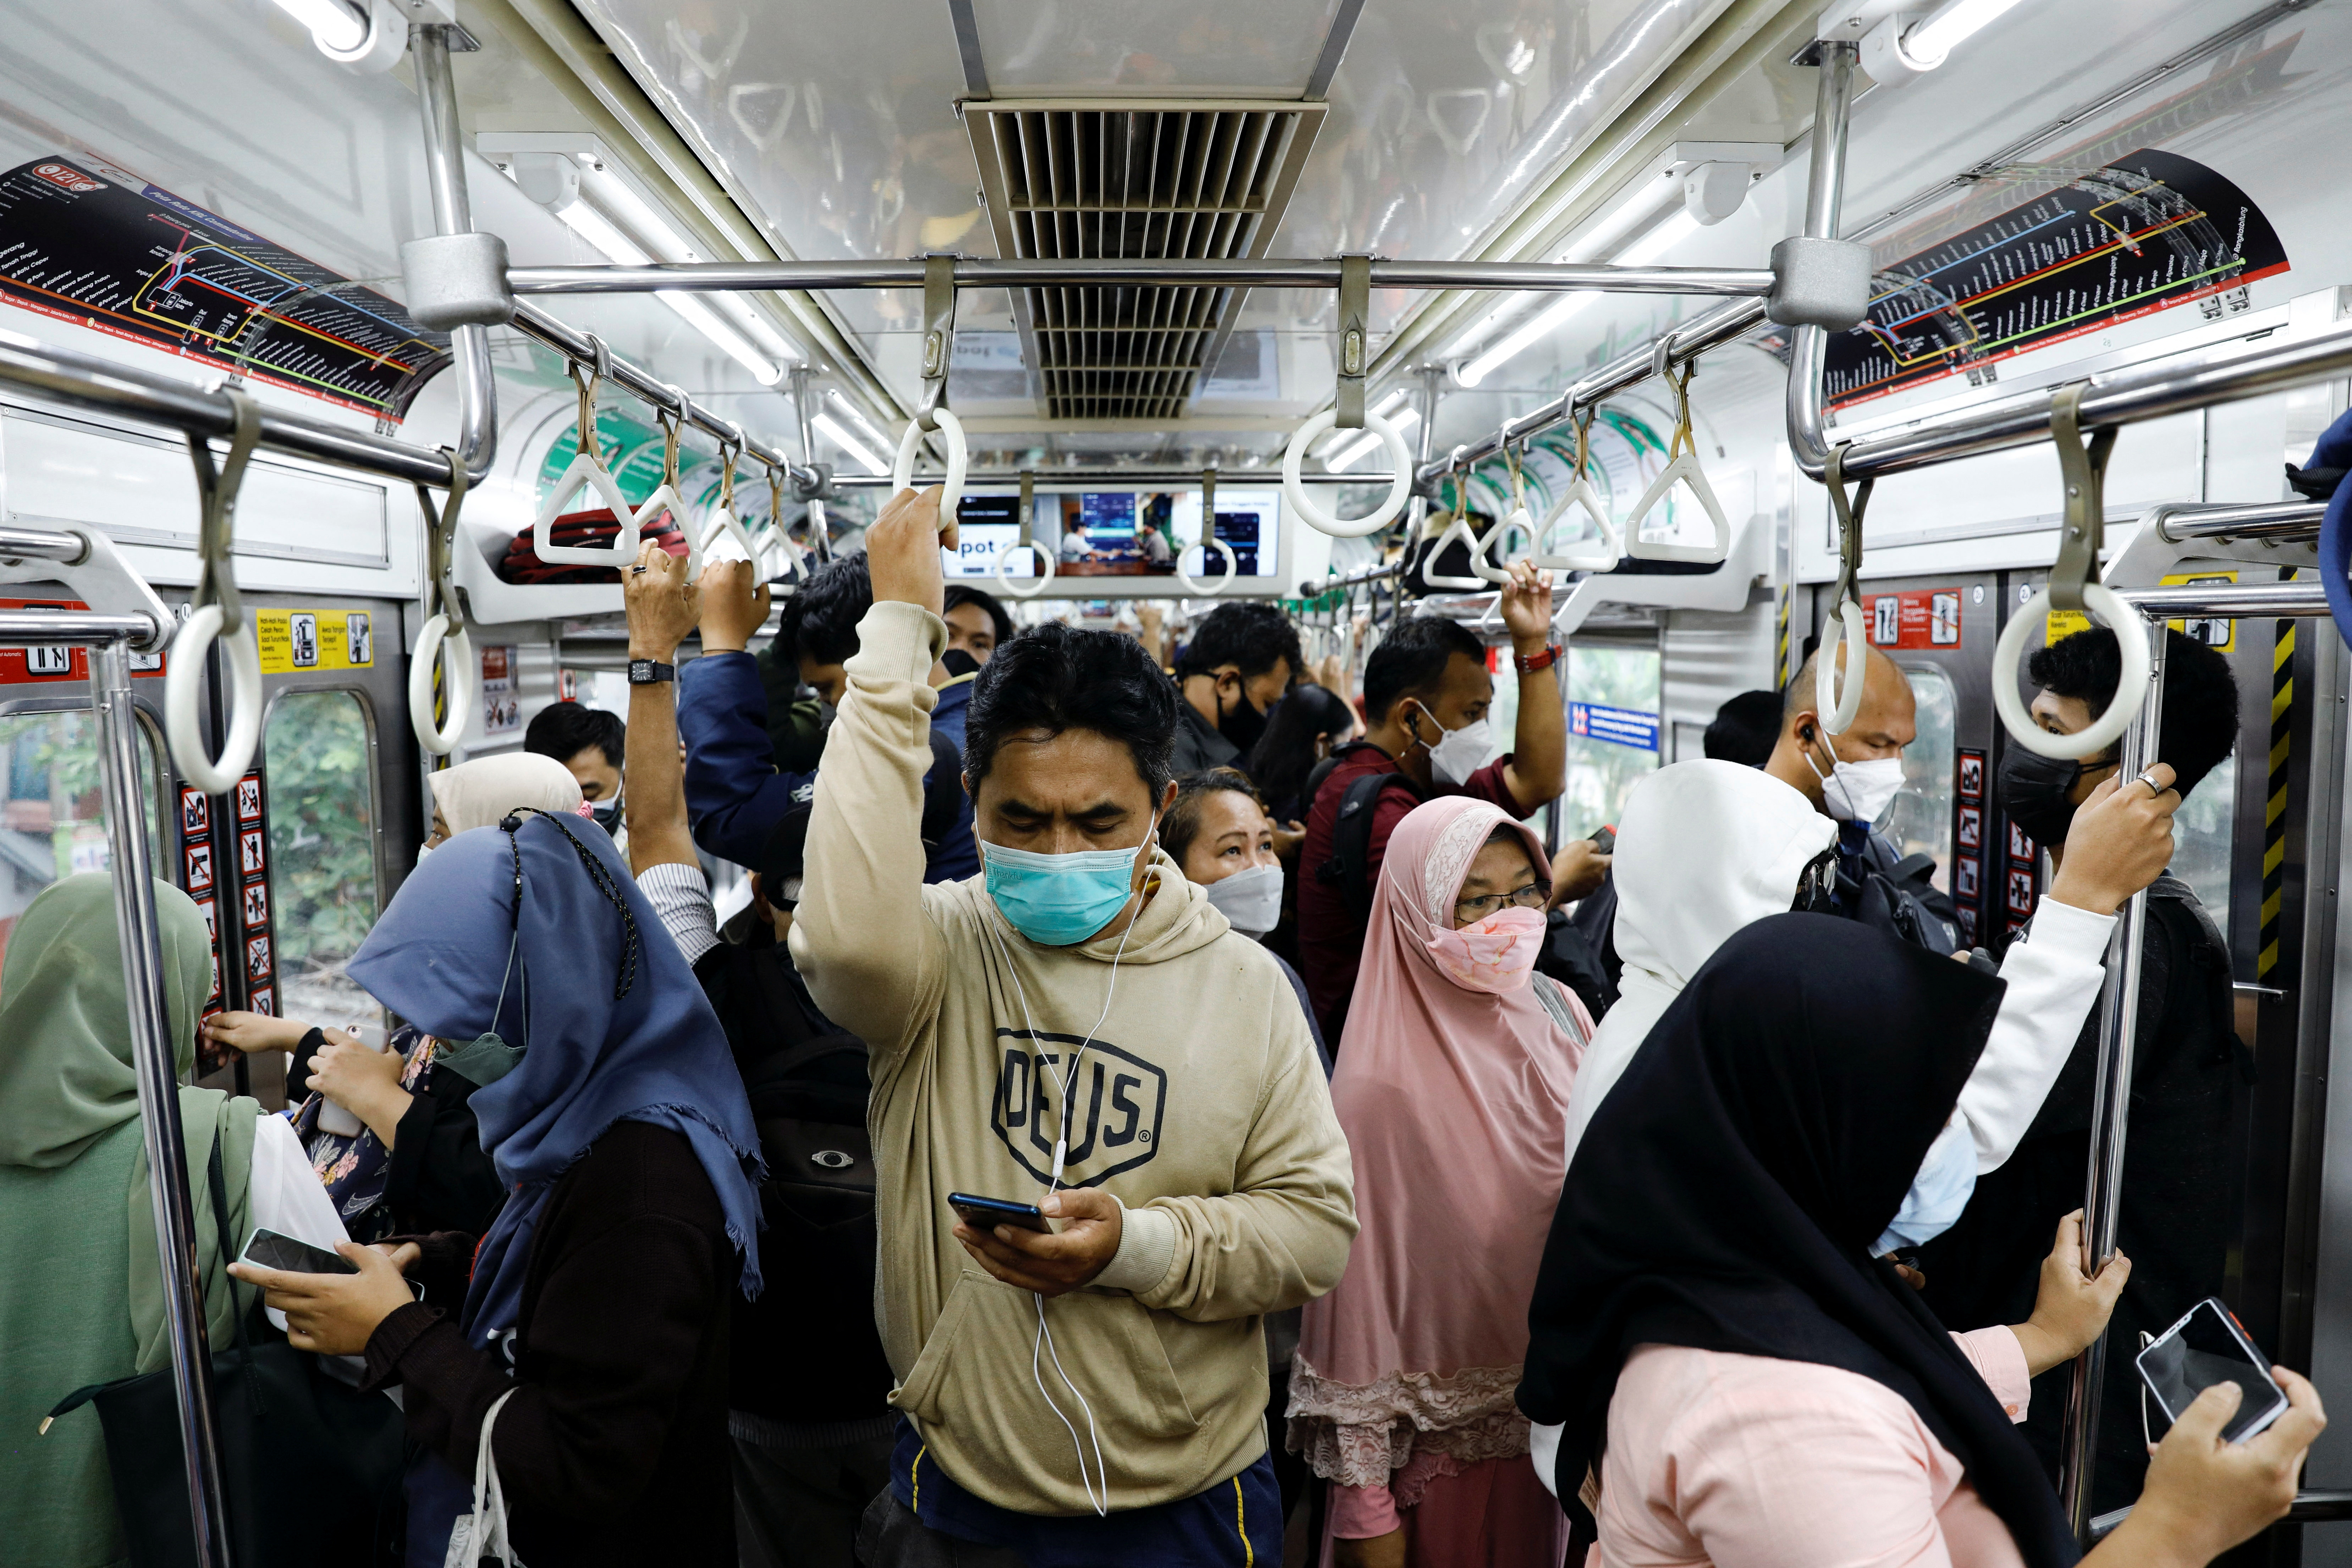 Passengers wearing protective masks stand inside a commuter train during the afternoon rush hours as the Omicron variant continues to spread, amid the coronavirus disease (COVID-19) pandemic, in Jakarta, Indonesia, January 3, 2022. REUTERS/Willy Kurniawan